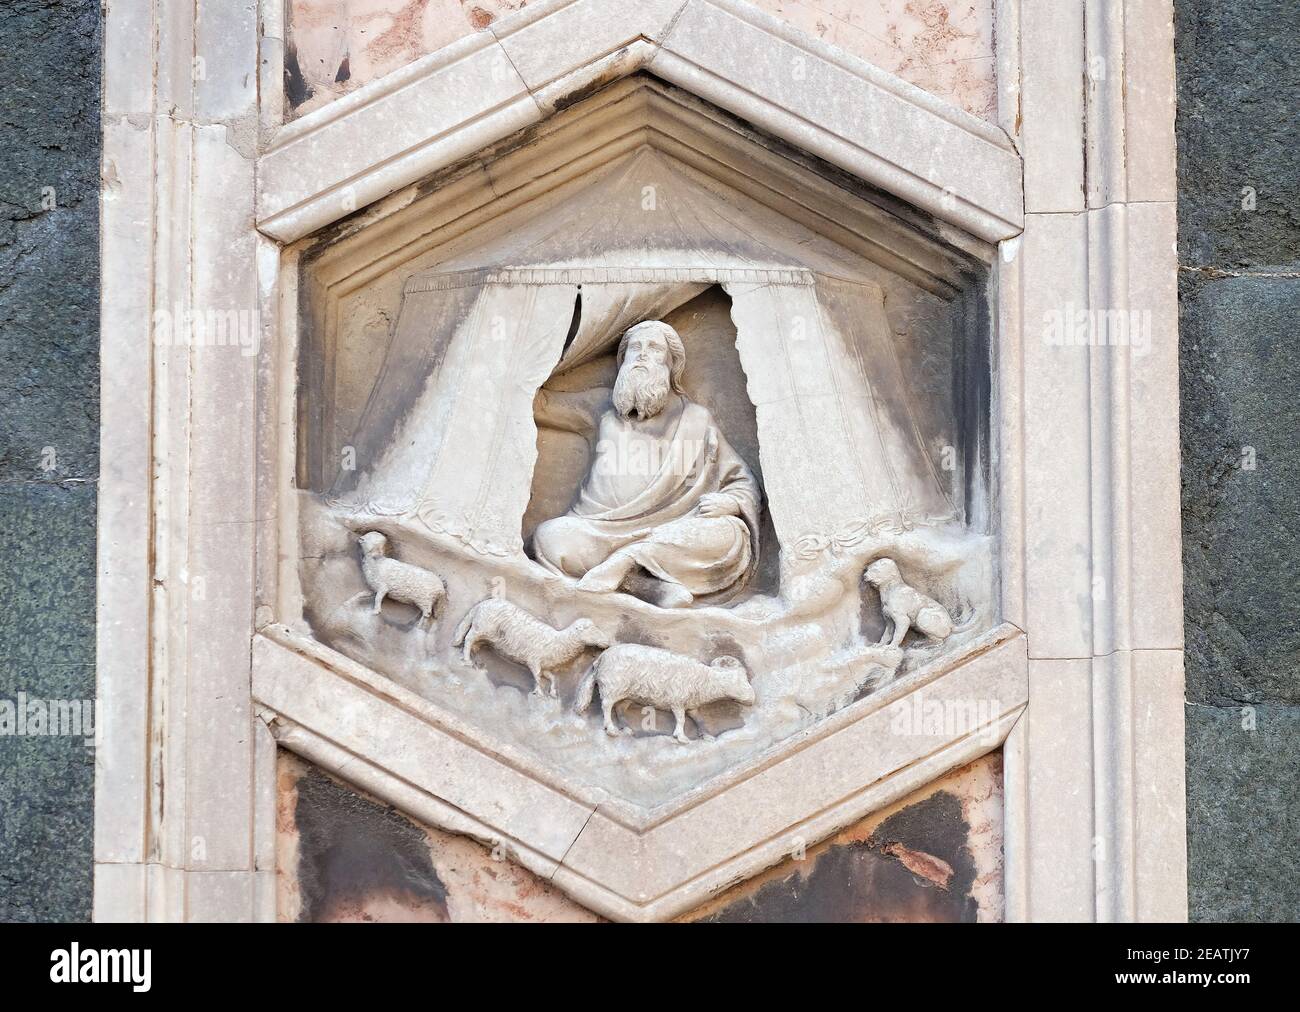 Jabal by Nino Pisano, 1334-36., Relief on Giotto Campanile of Cattedrale di Santa Maria del Fiore (Cathedral of Saint Mary of the Flower), Florence, Italy Stock Photo